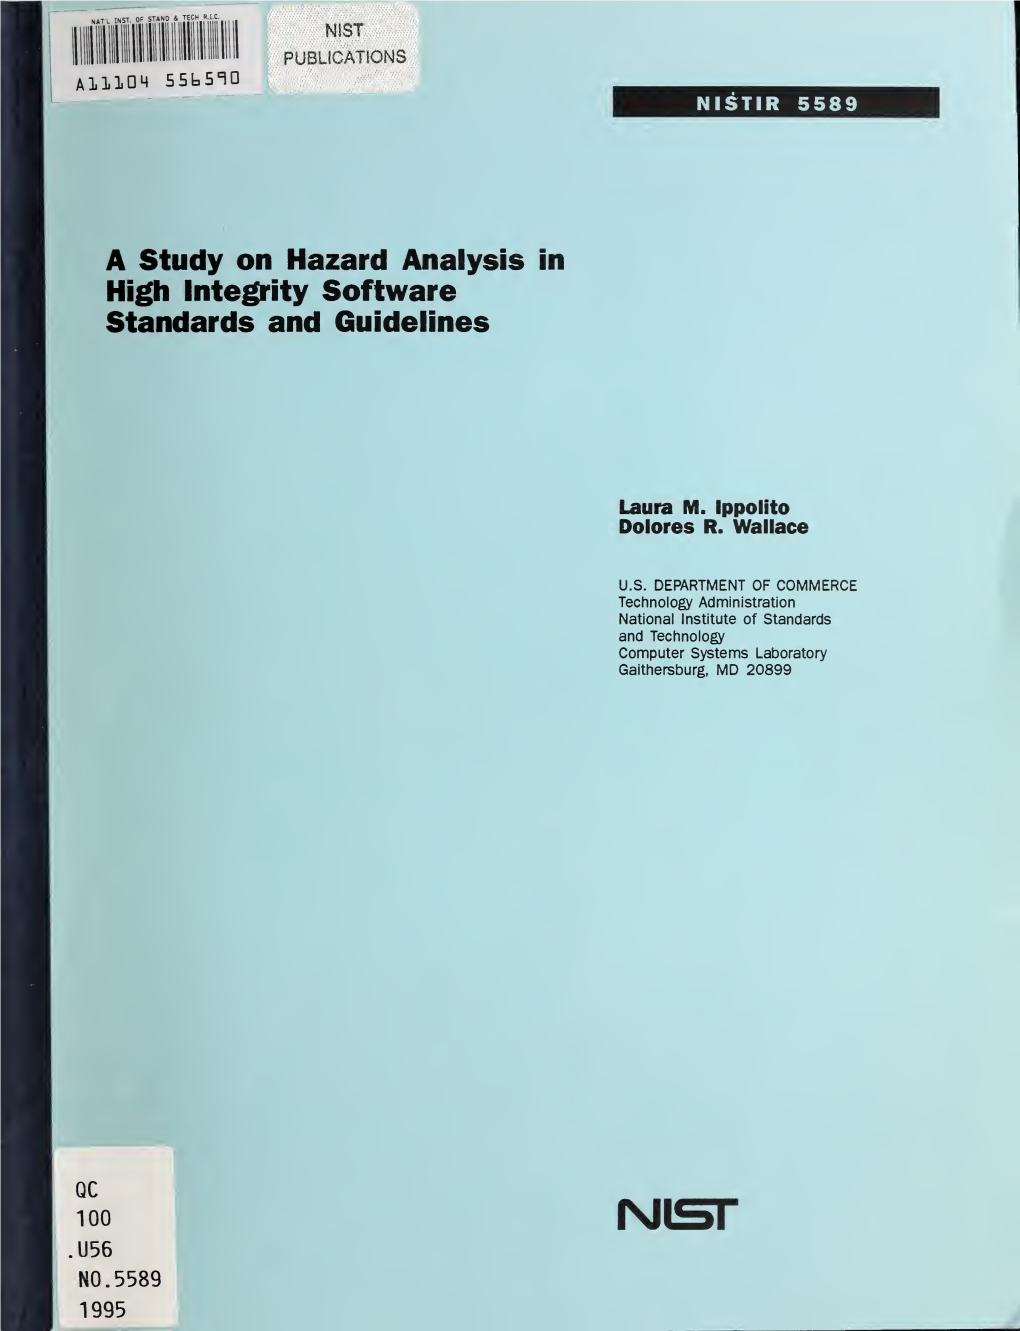 A Study on Hazard Analysis in High Integrity Software Standards and Guideiines